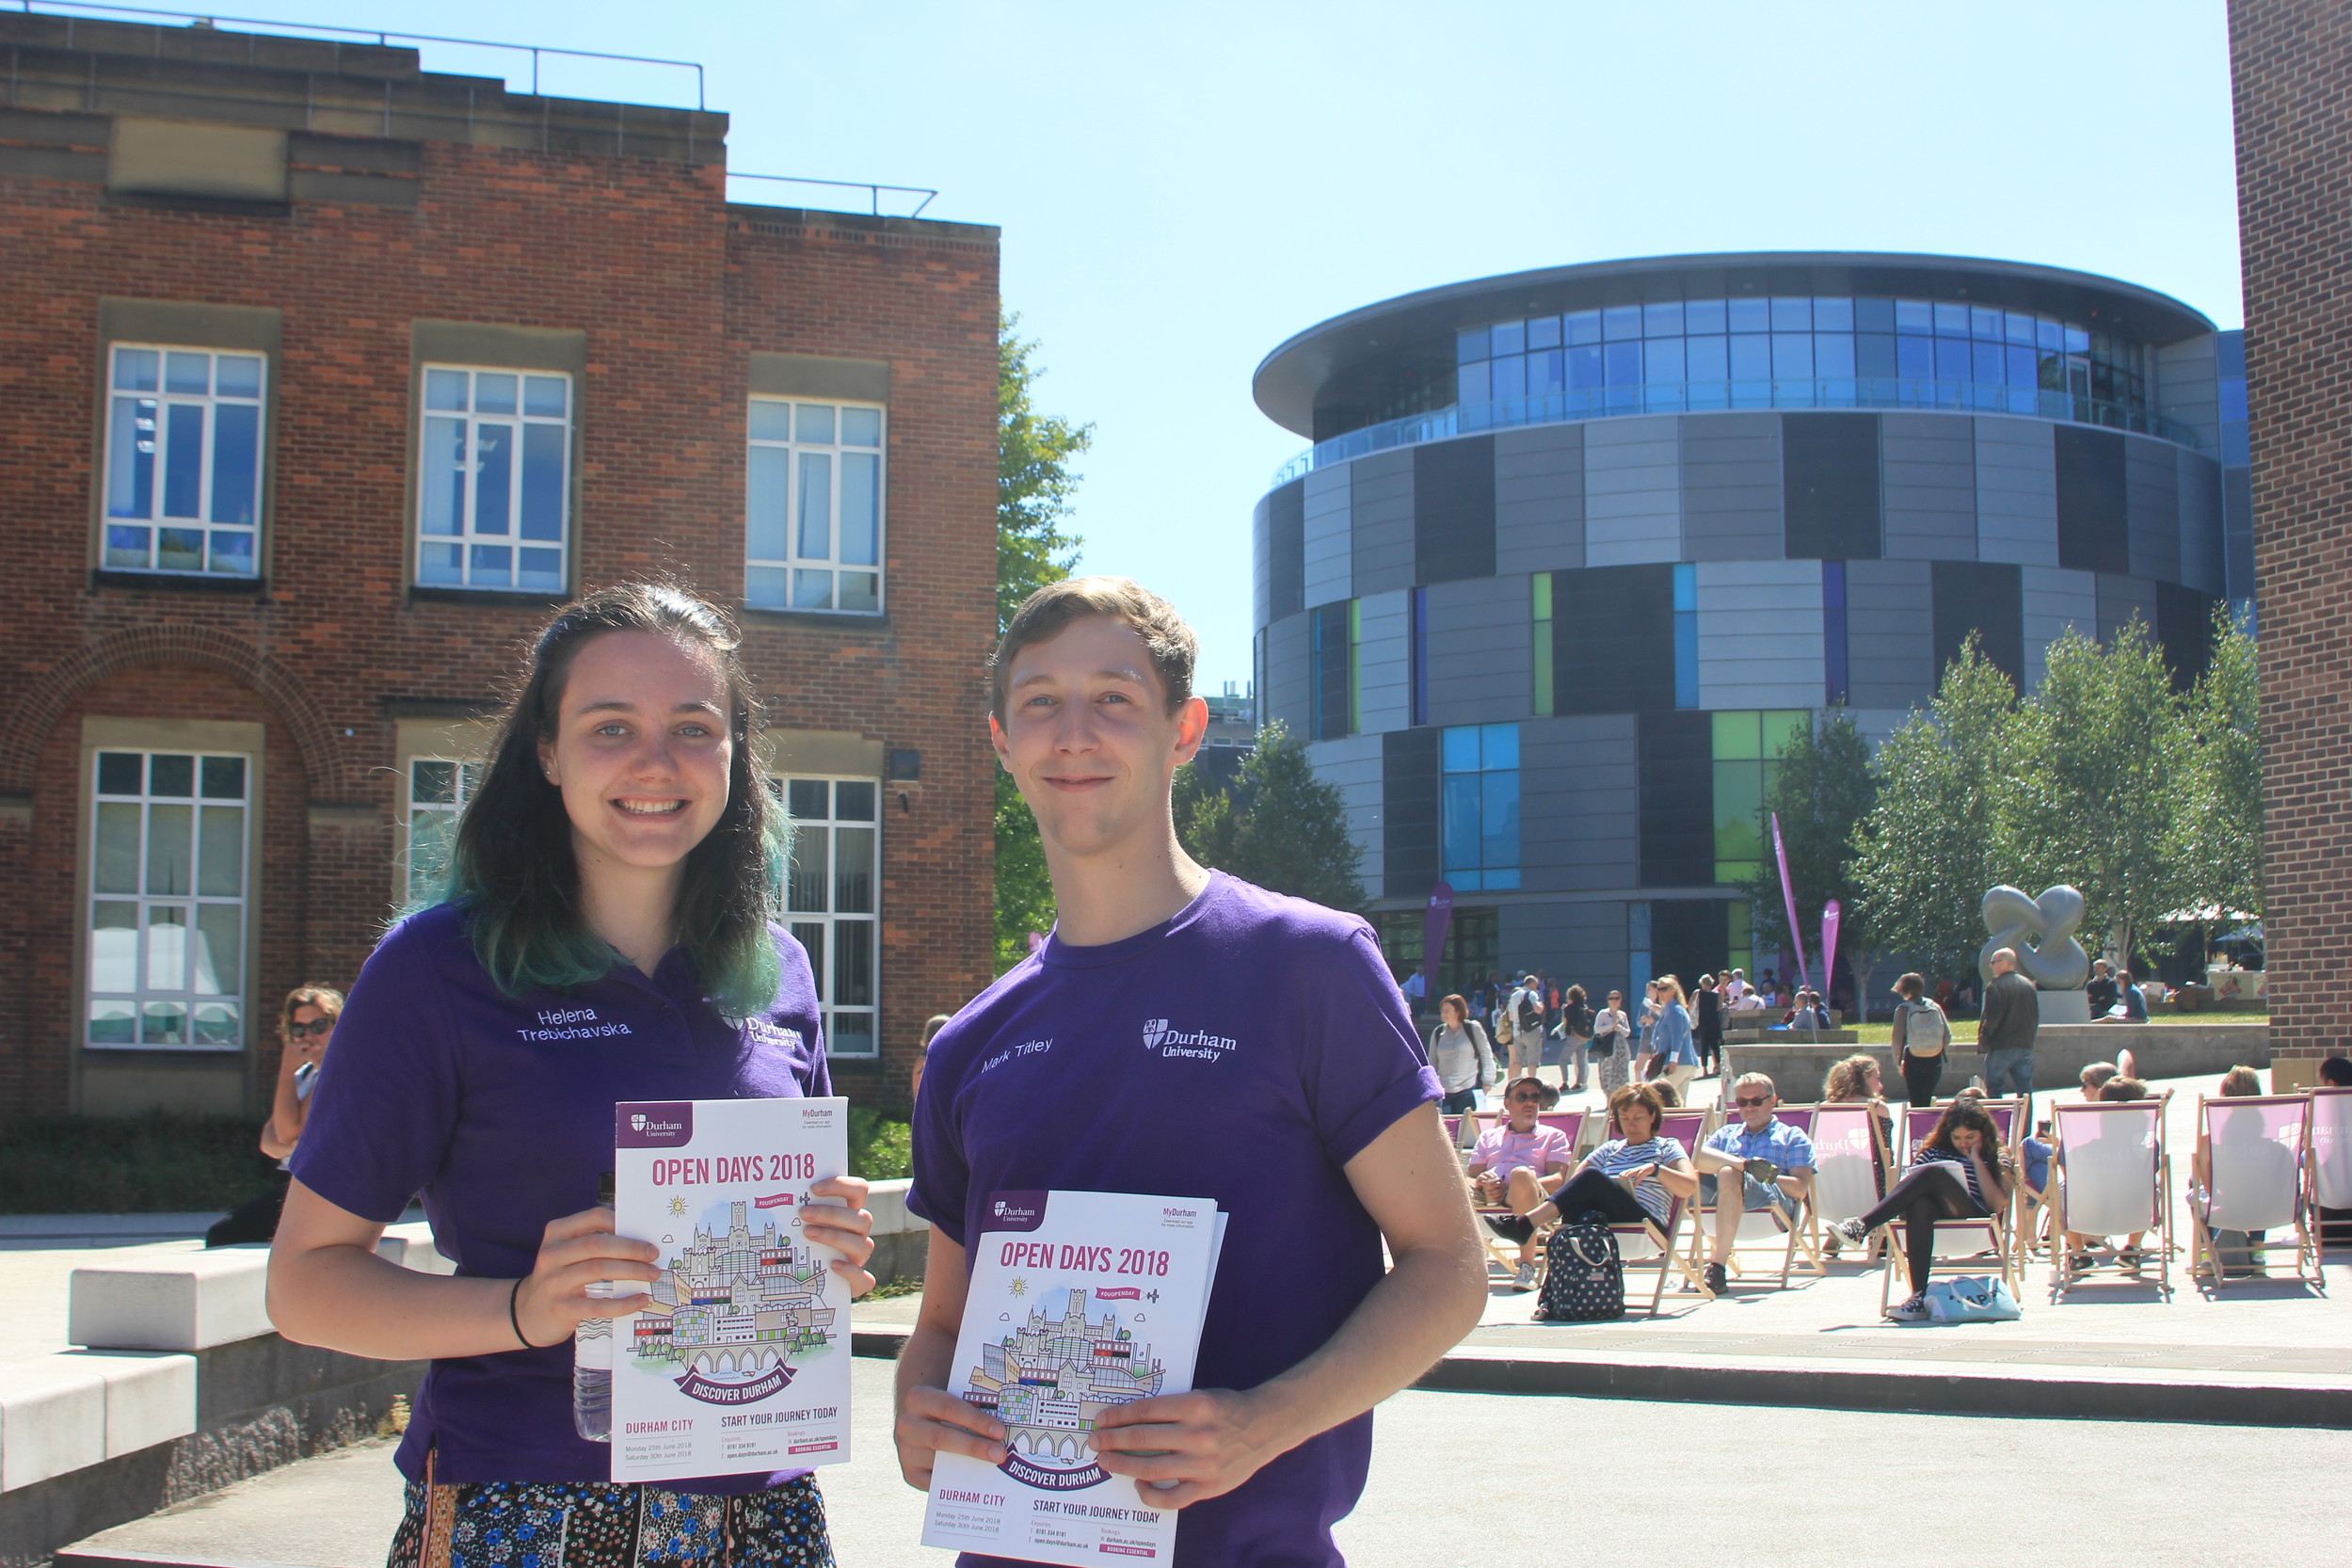 TTwo ֱ students on campus with open day brochures